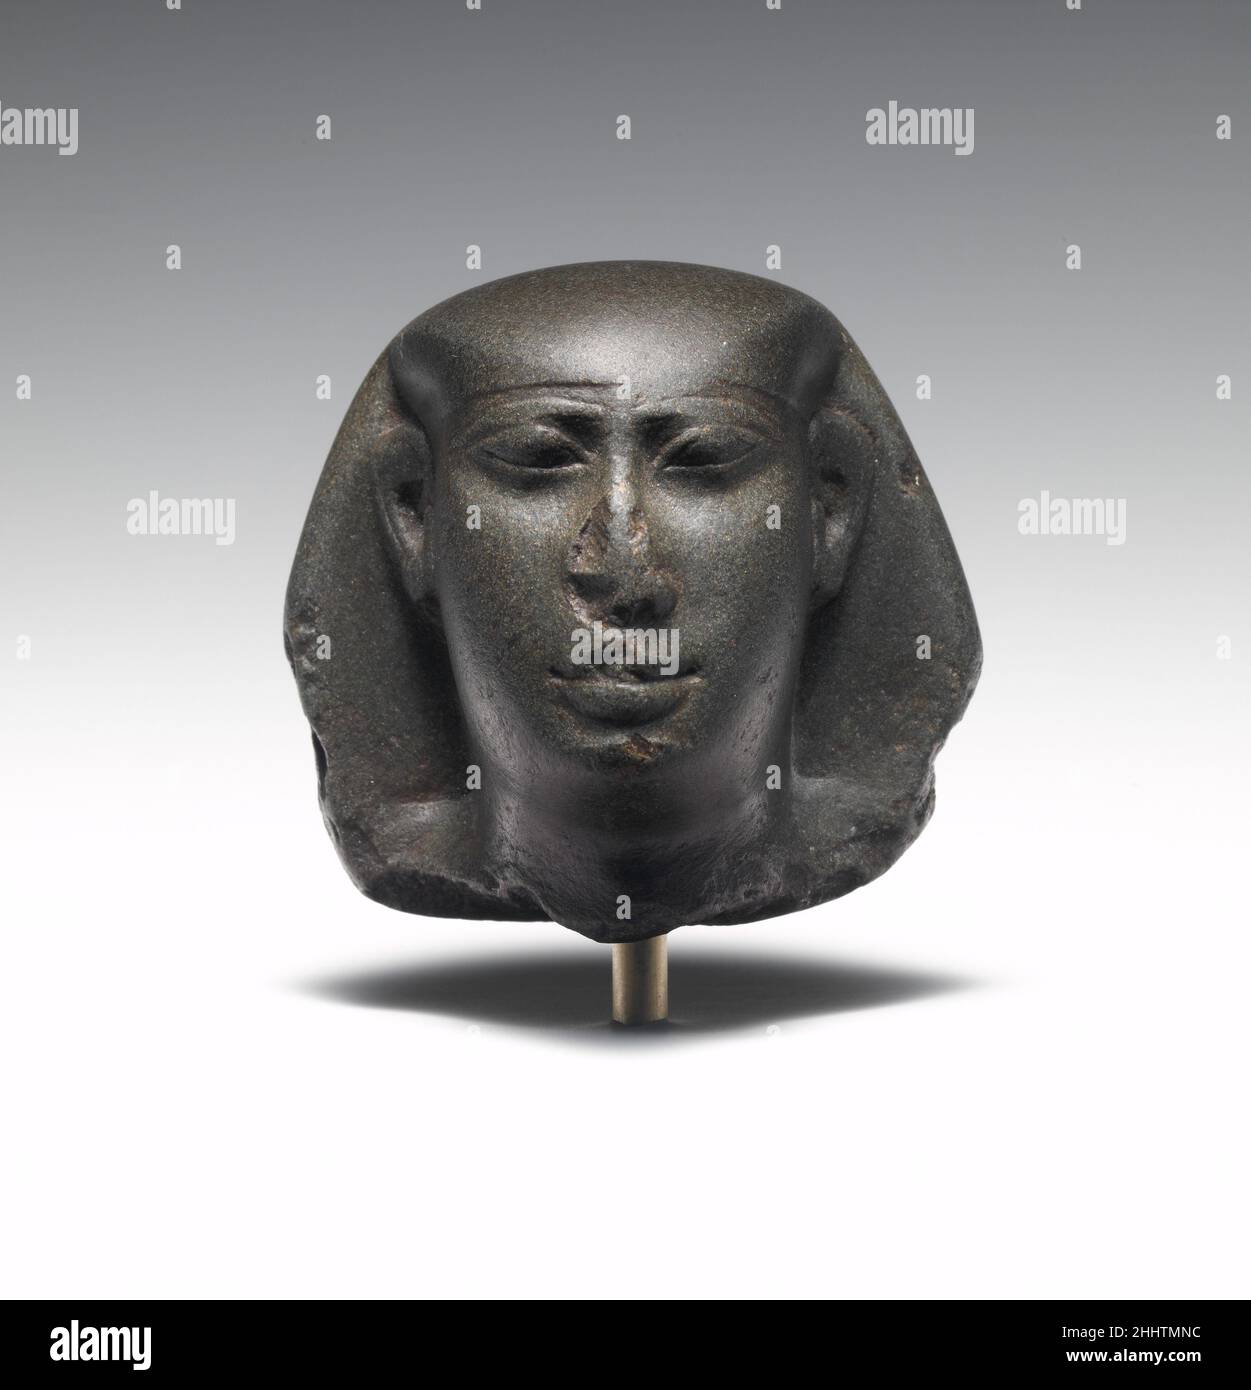 Head of King Amasis, reworked for a non-royal individual 570–526 B.C. Late Period, Saite The bag wig now visible betrays the original form of the royal nemes headdress, indicating this head was recut from a royal portrait for a non-royal official. The long face and high-set brow line are distinctive characteristics of King Amasis, indicating this sovereign was originally represented.. Head of King Amasis, reworked for a non-royal individual  553275 Stock Photo